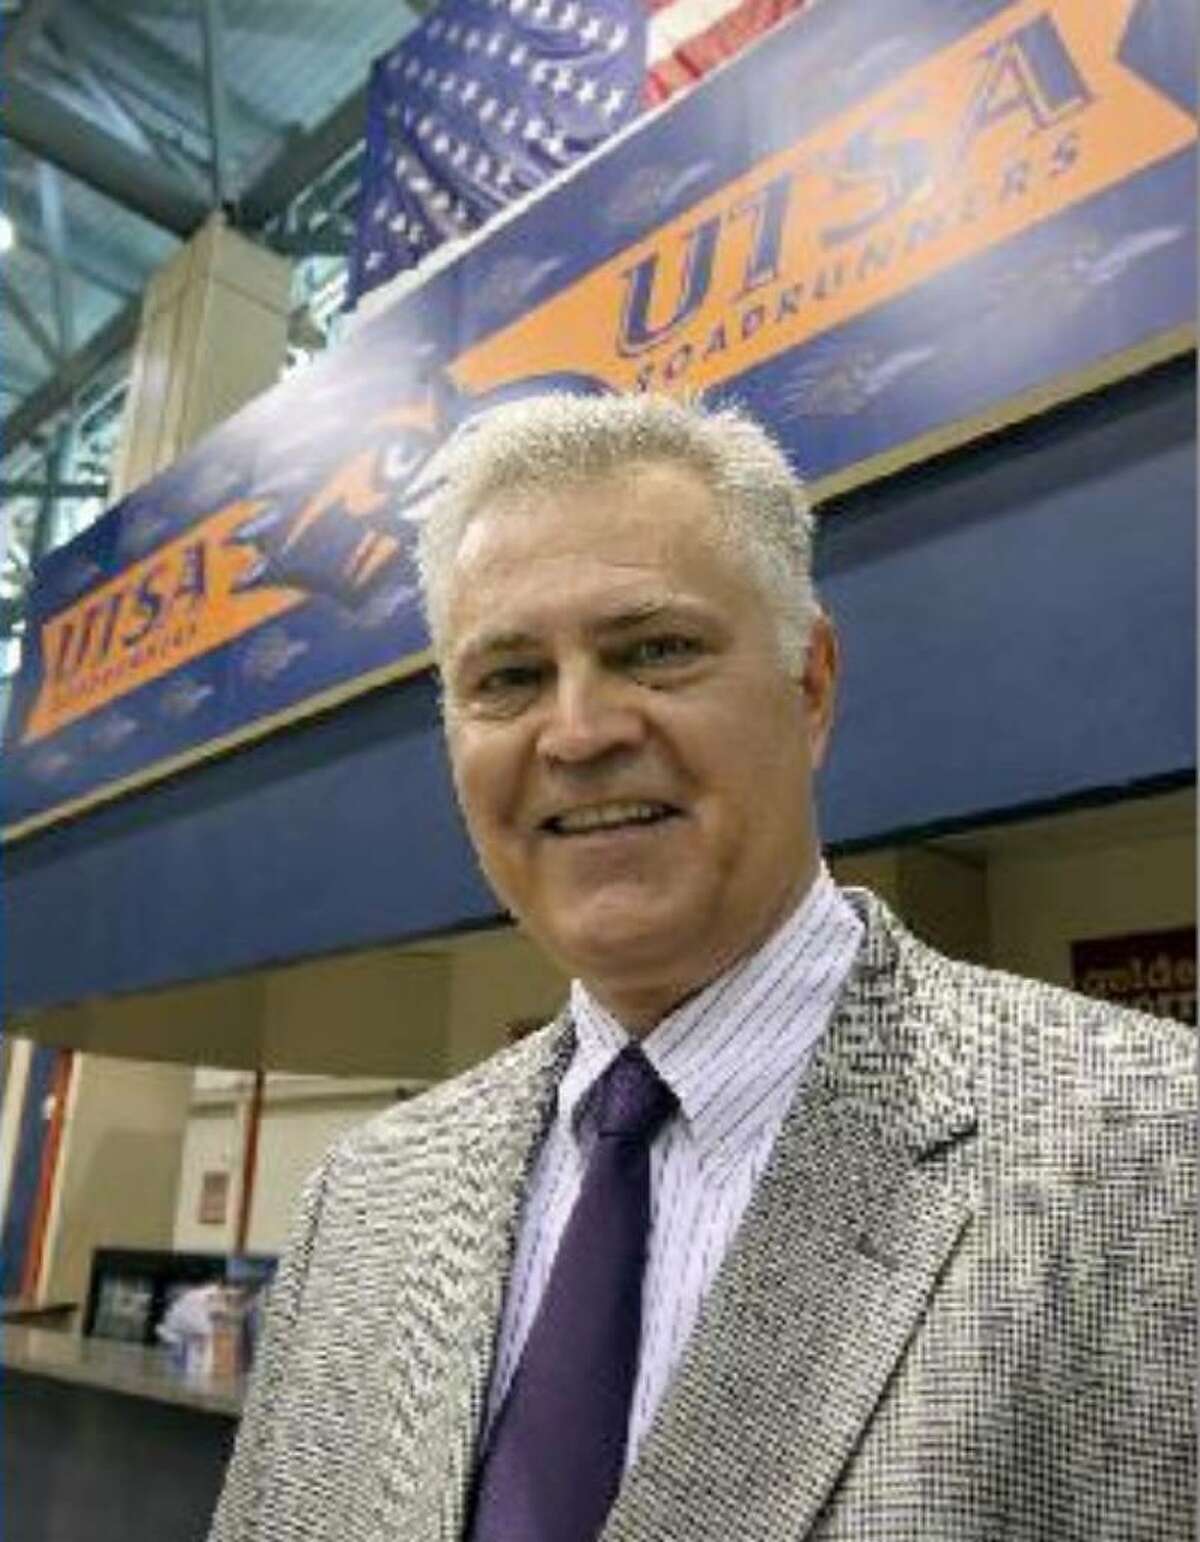 UTSA athletics marketing director Jim Goodman began with the Spurs in the early 1980s.